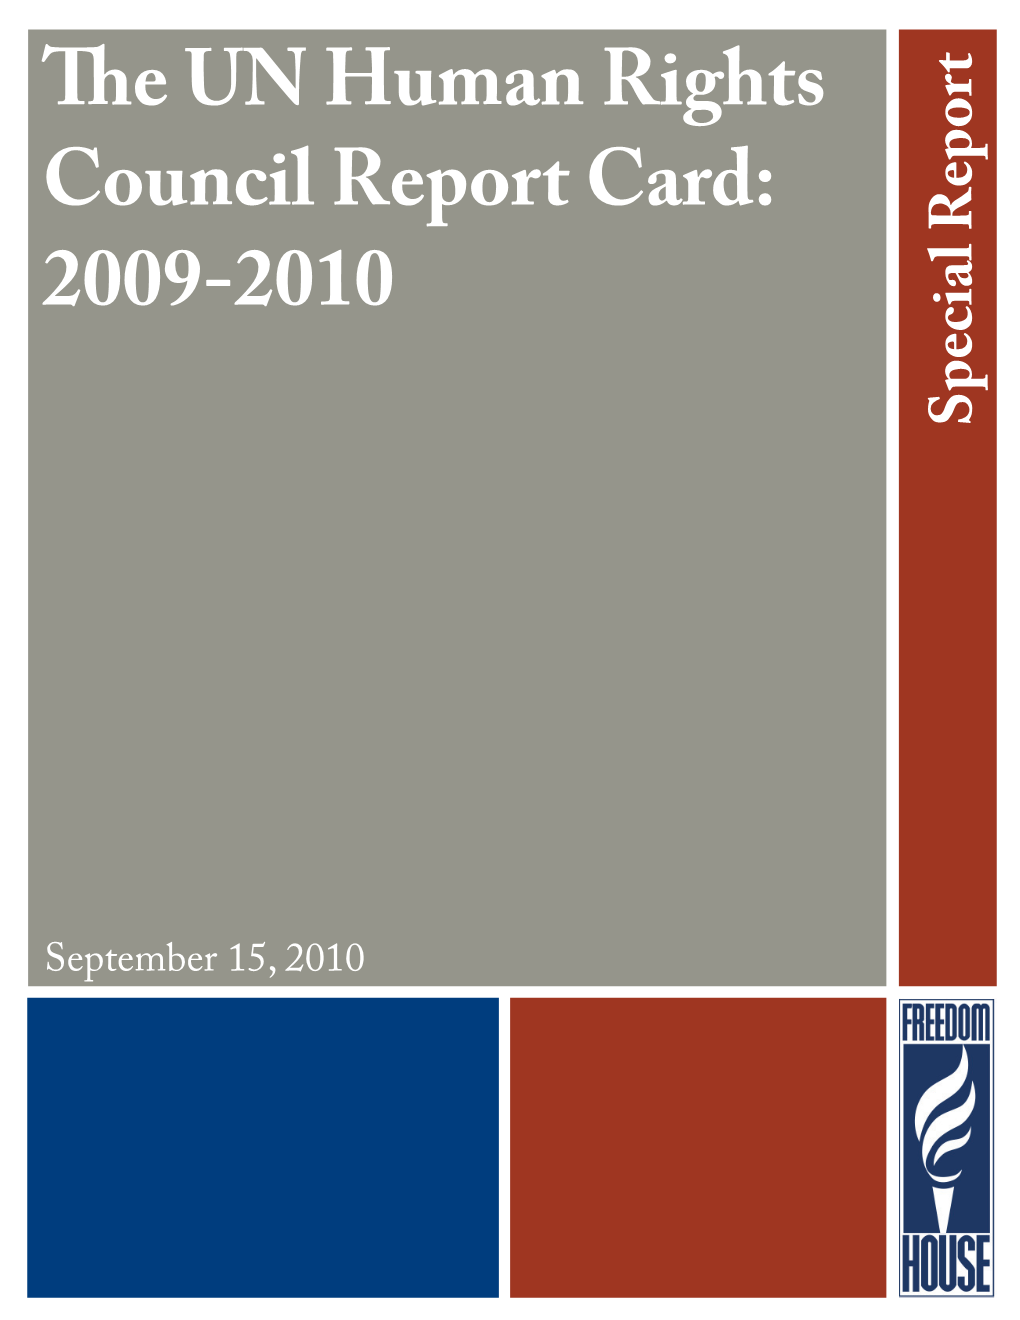 The UN Human Rights Council Report Card: 2009-2010